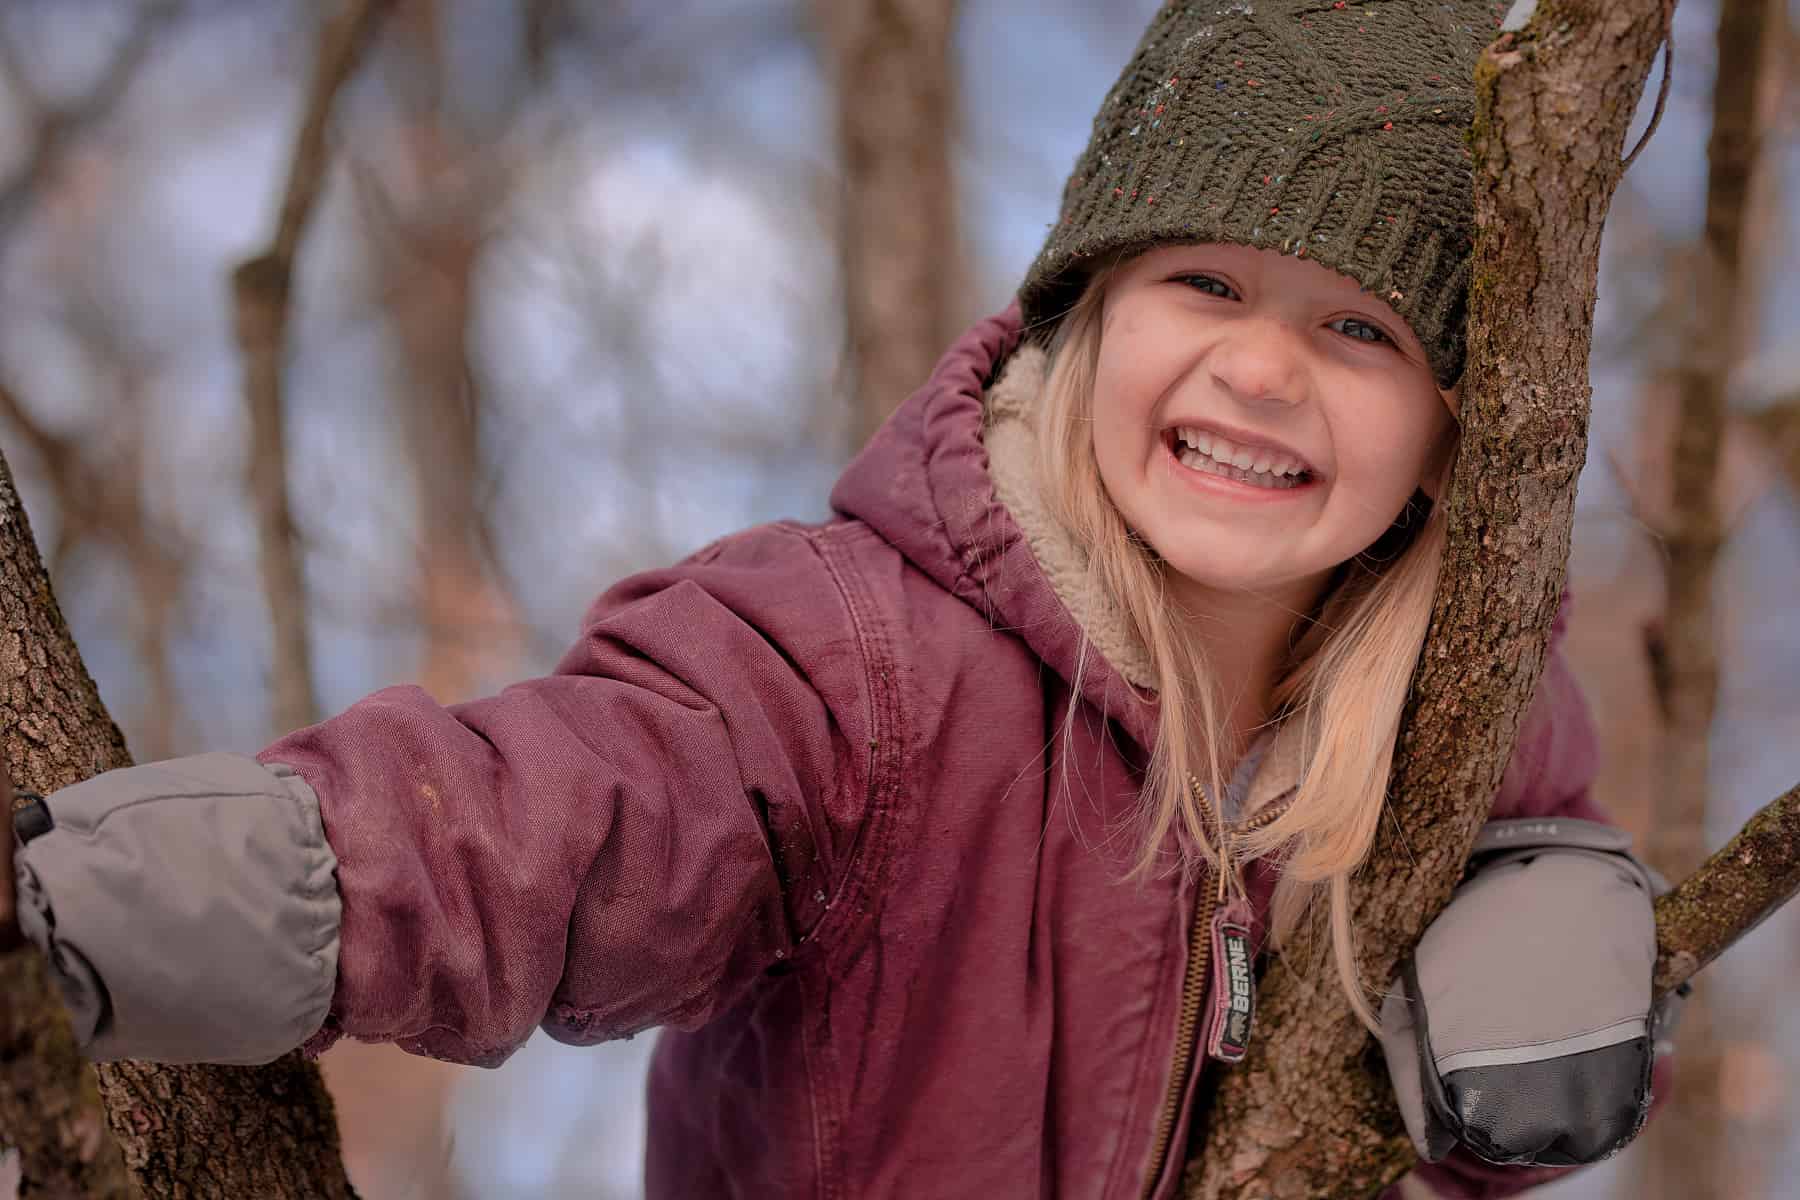 Gear Review: Best Kids' Gloves and Mittens for Outdoor Play